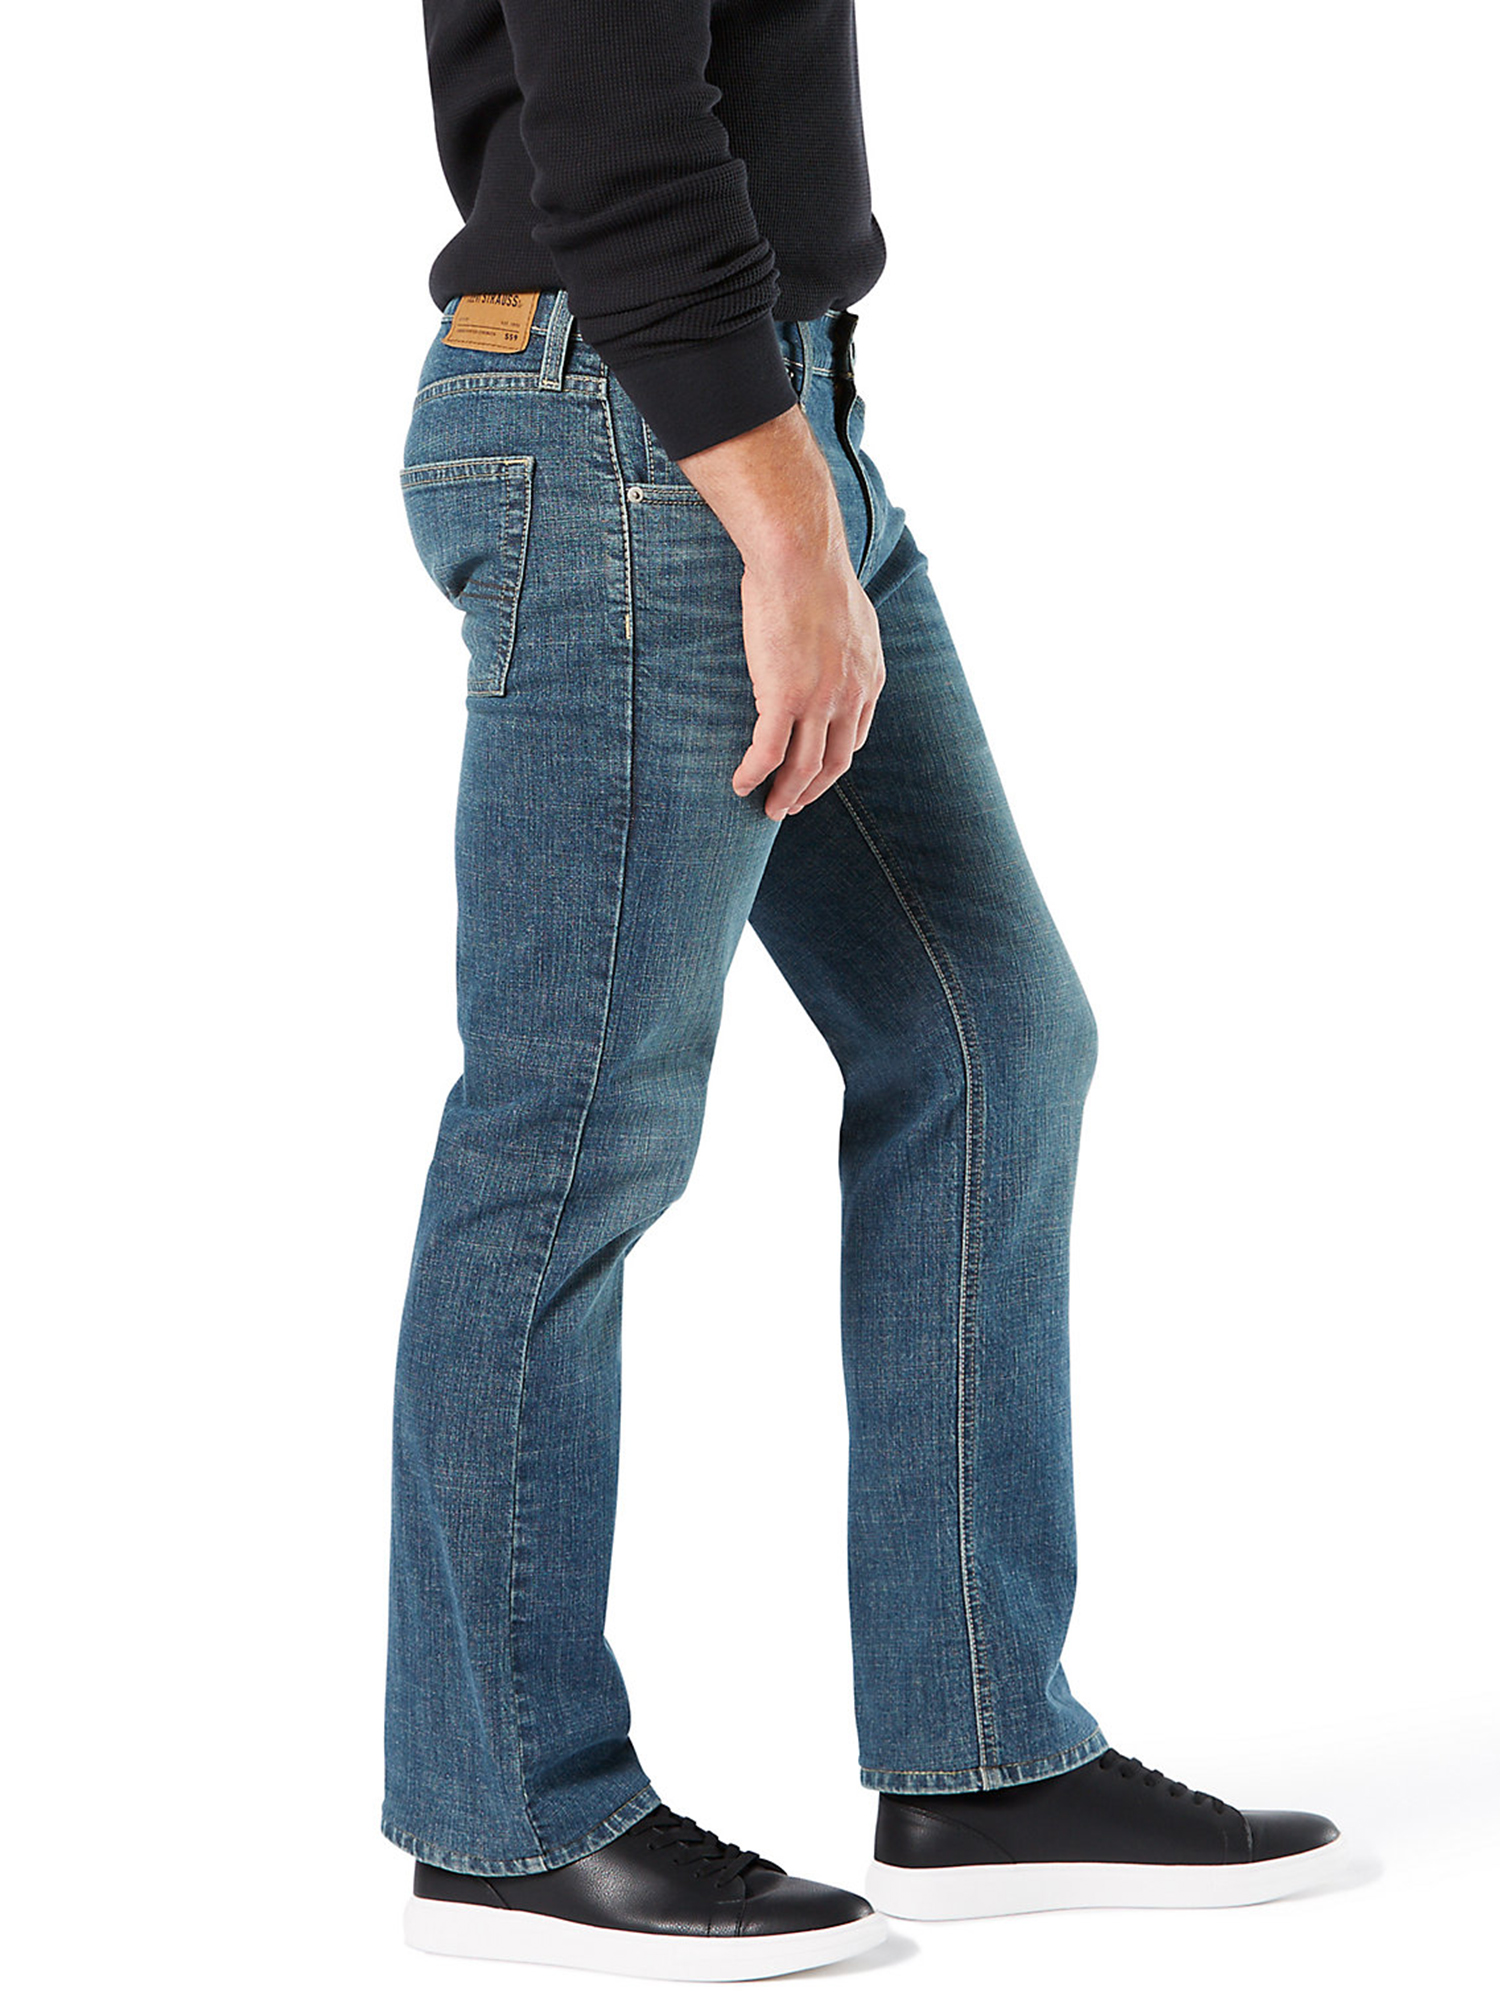 Signature by Levi Strauss & Co. Men's and Big and Tall Bootcut Jeans - image 4 of 9